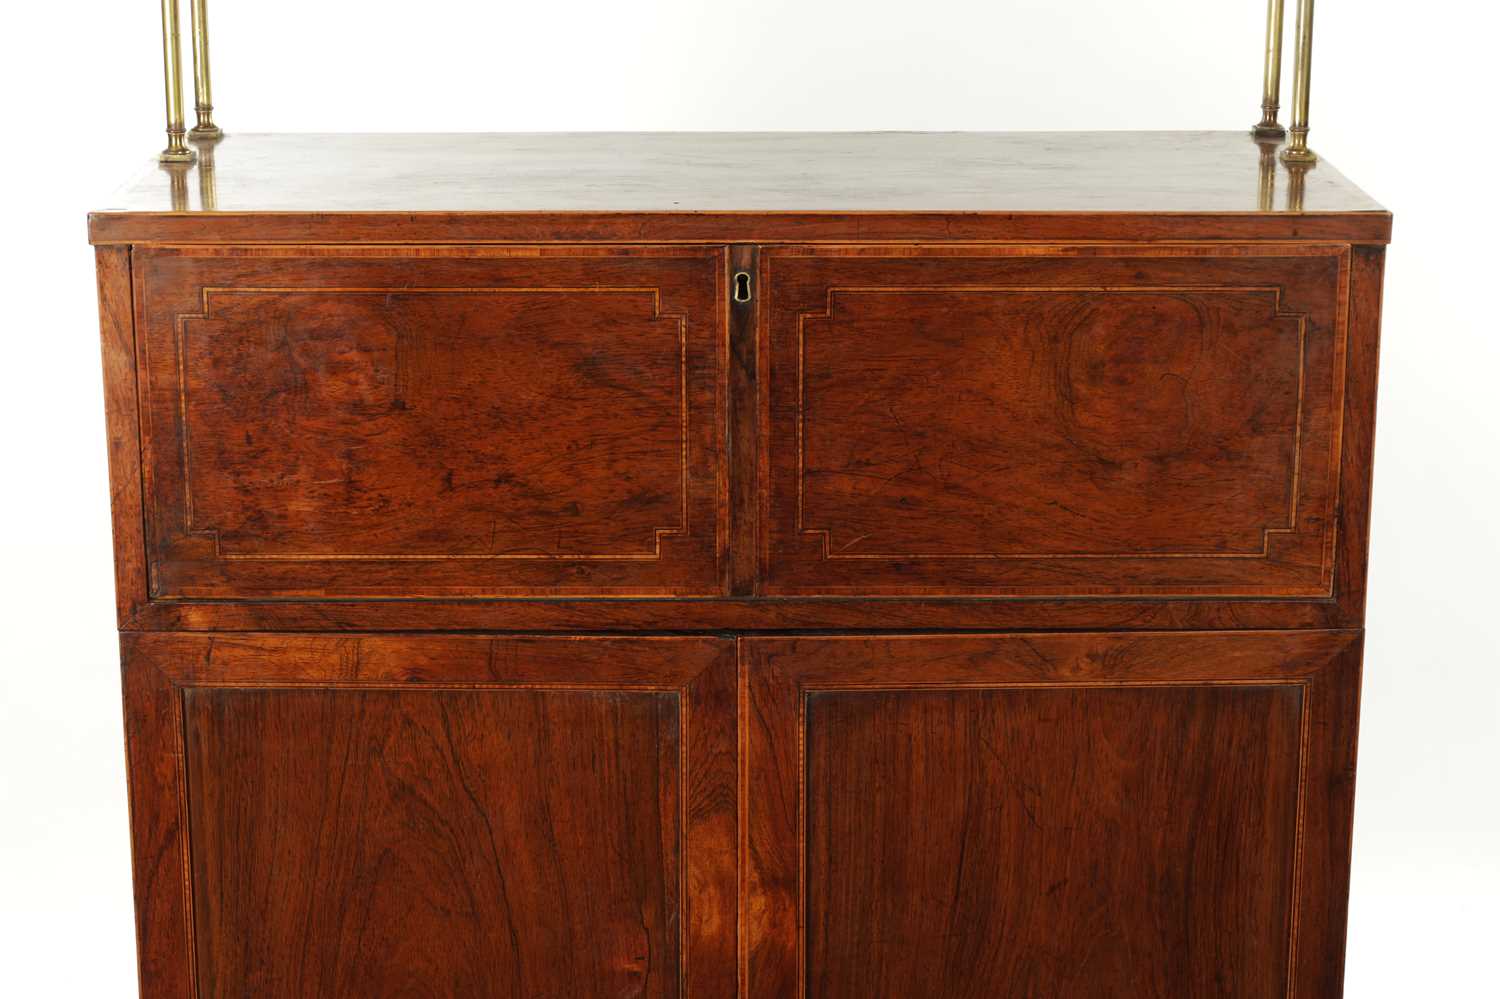 A REGENCY ROSEWOOD AND KING WOOD CROSS-BANDED SECRETAIRE SIDE CABINET - Image 2 of 17